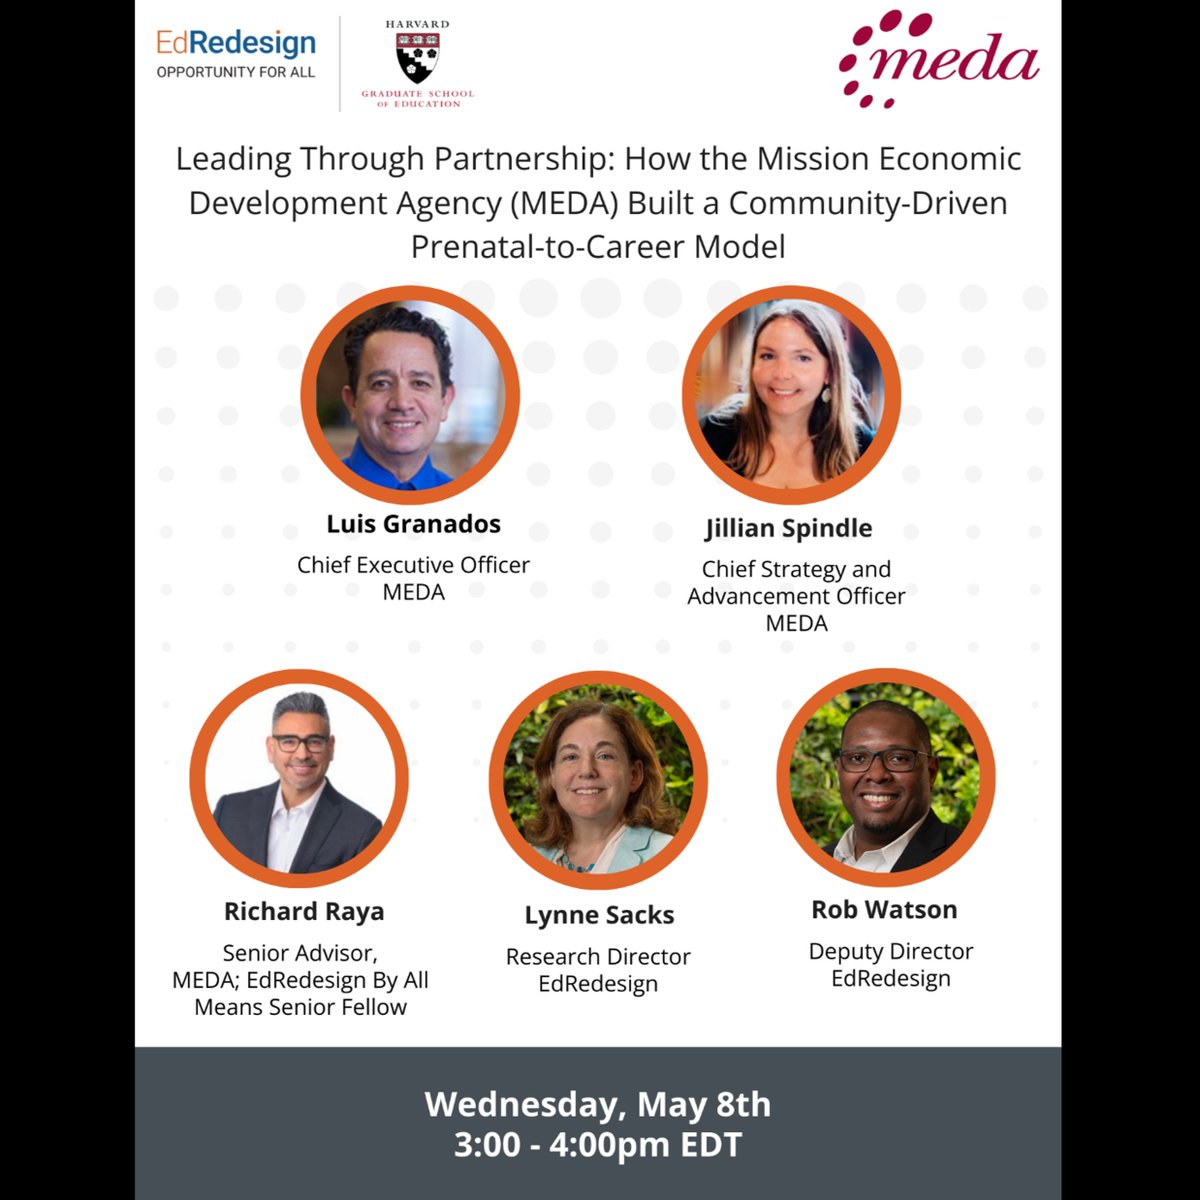 Save the date for our webinar on 5/8 with @medasf leaders. The panel will discuss highlights of EdRedesign’s recent case & MEDA’s community-centered approach that puts families at the center. Register: bit.ly/3UbjLH7 @hgse @harvard